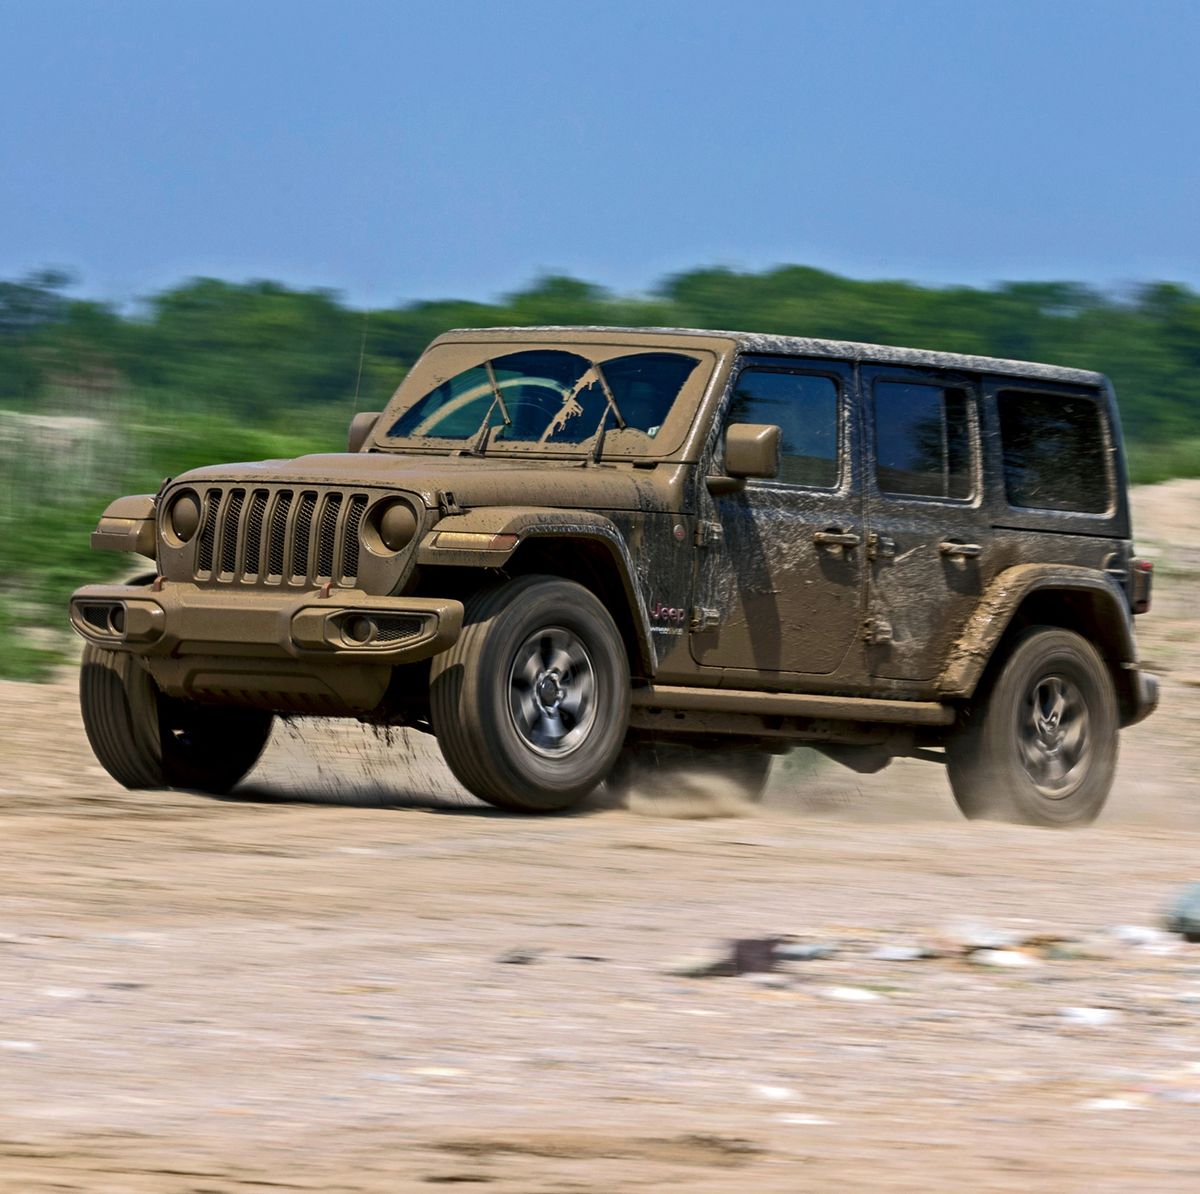 2018 Jeep Wrangler Rubicon Unlimited Is Tough With a Manual, V-6